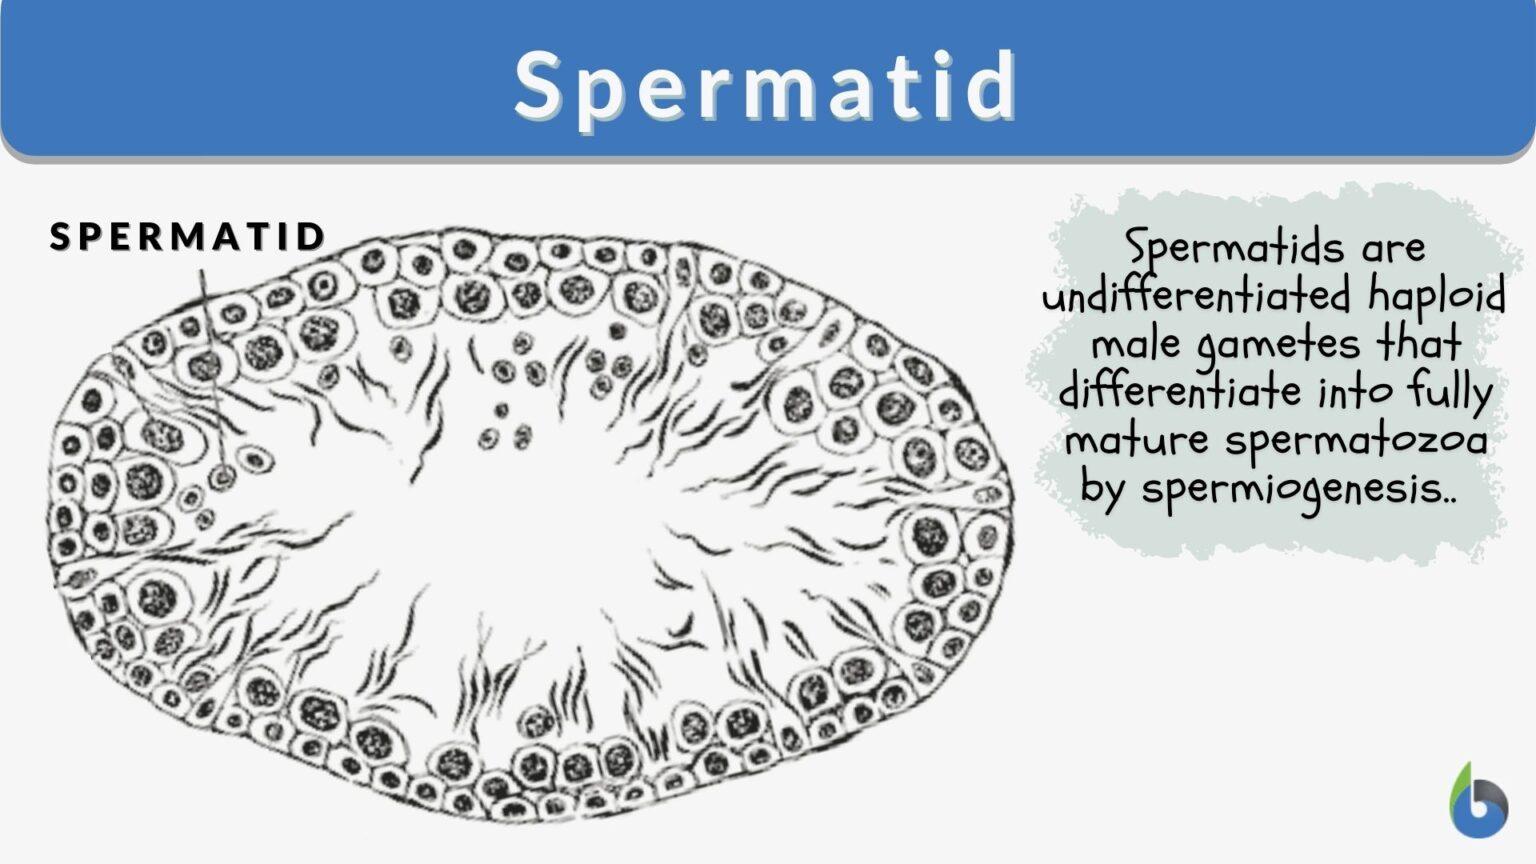 Spermatid - Definition and Examples - Biology Online Dictionary